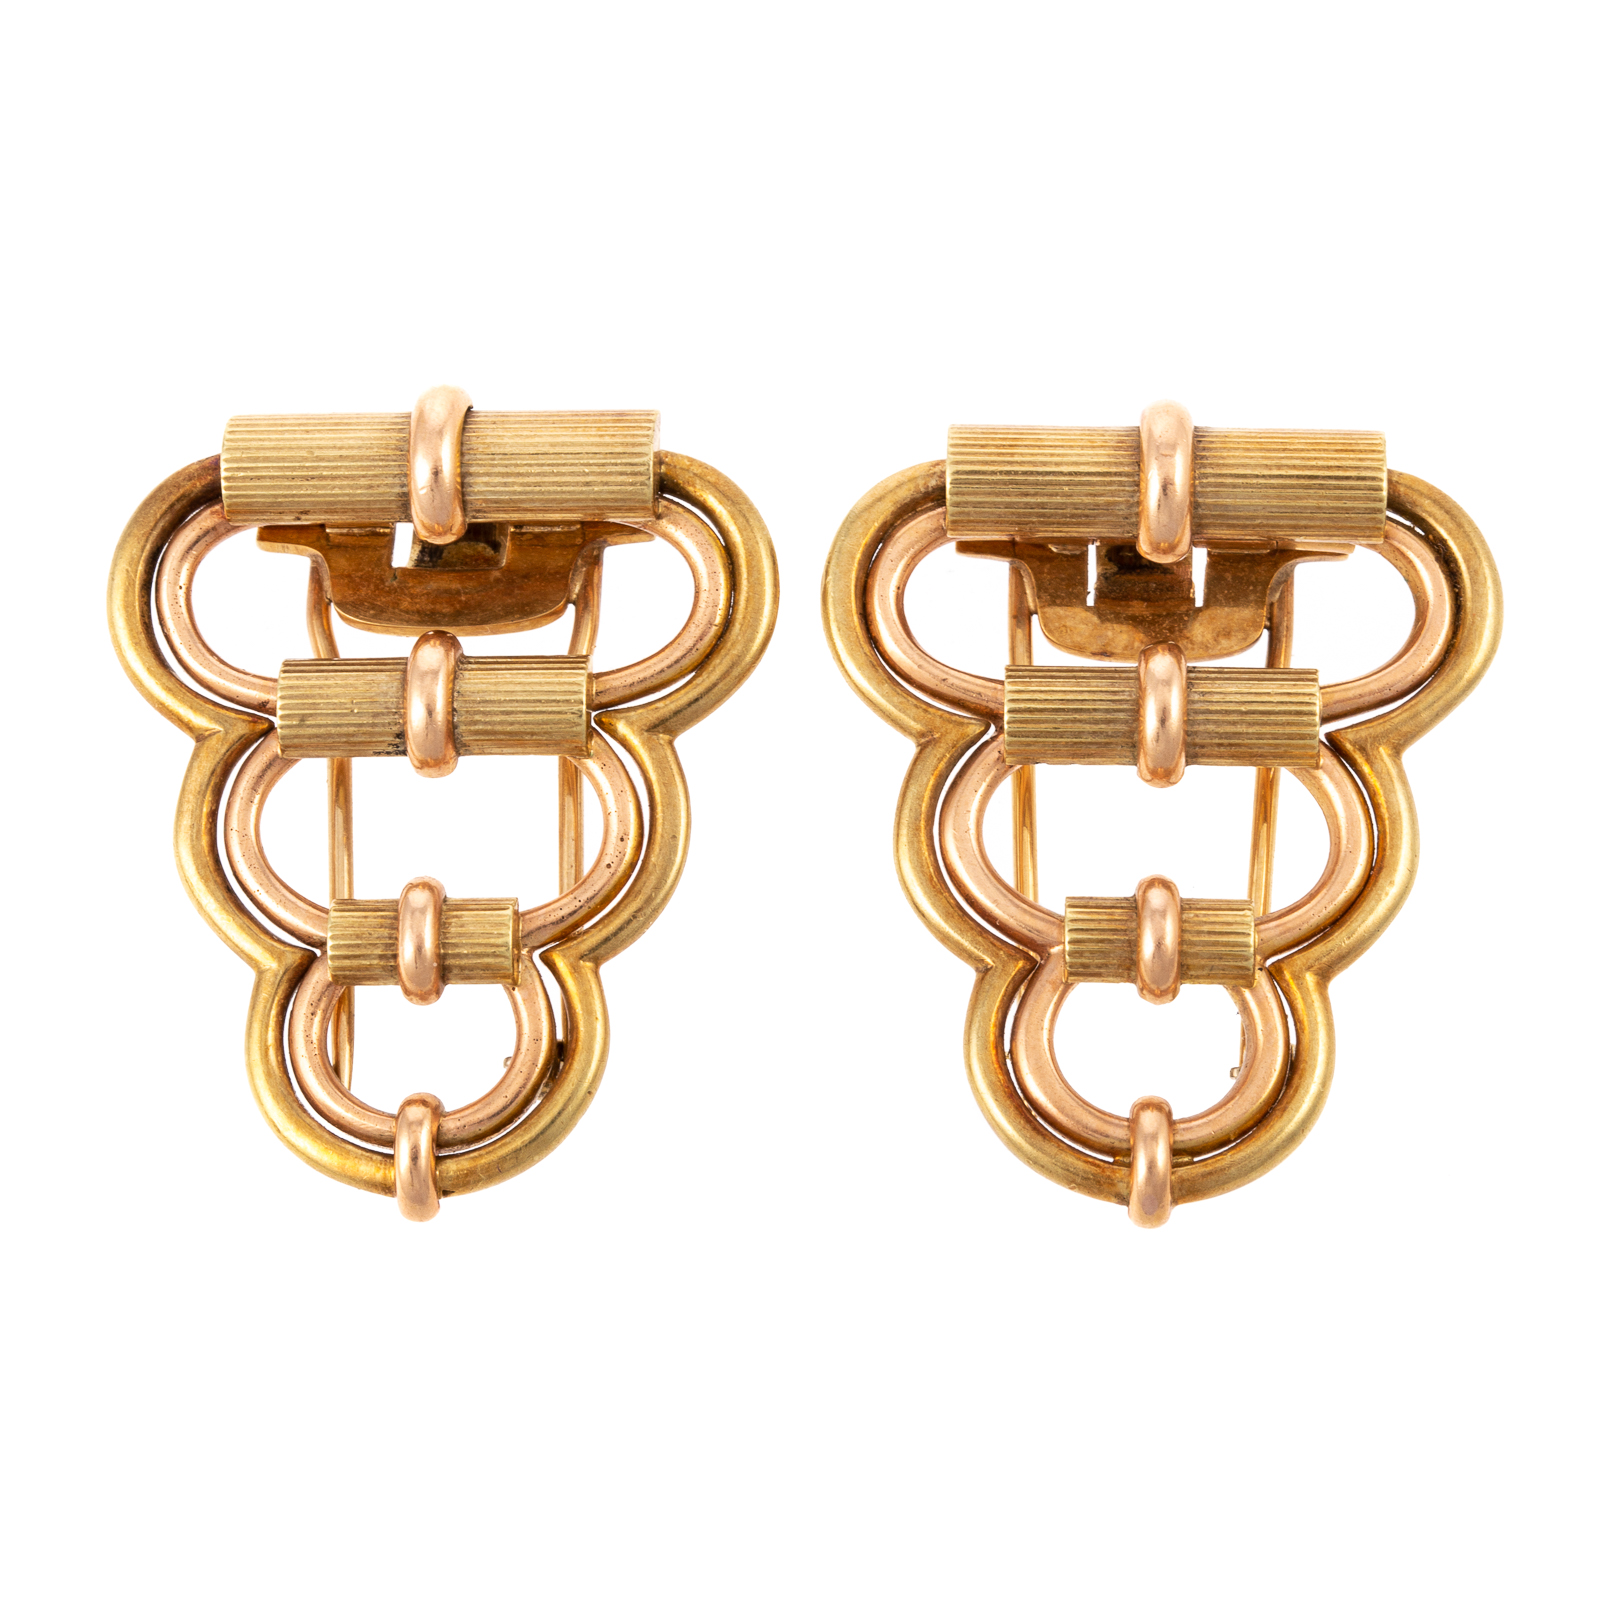 A PAIR OF RETRO DRESS CLIPS IN 288d3a